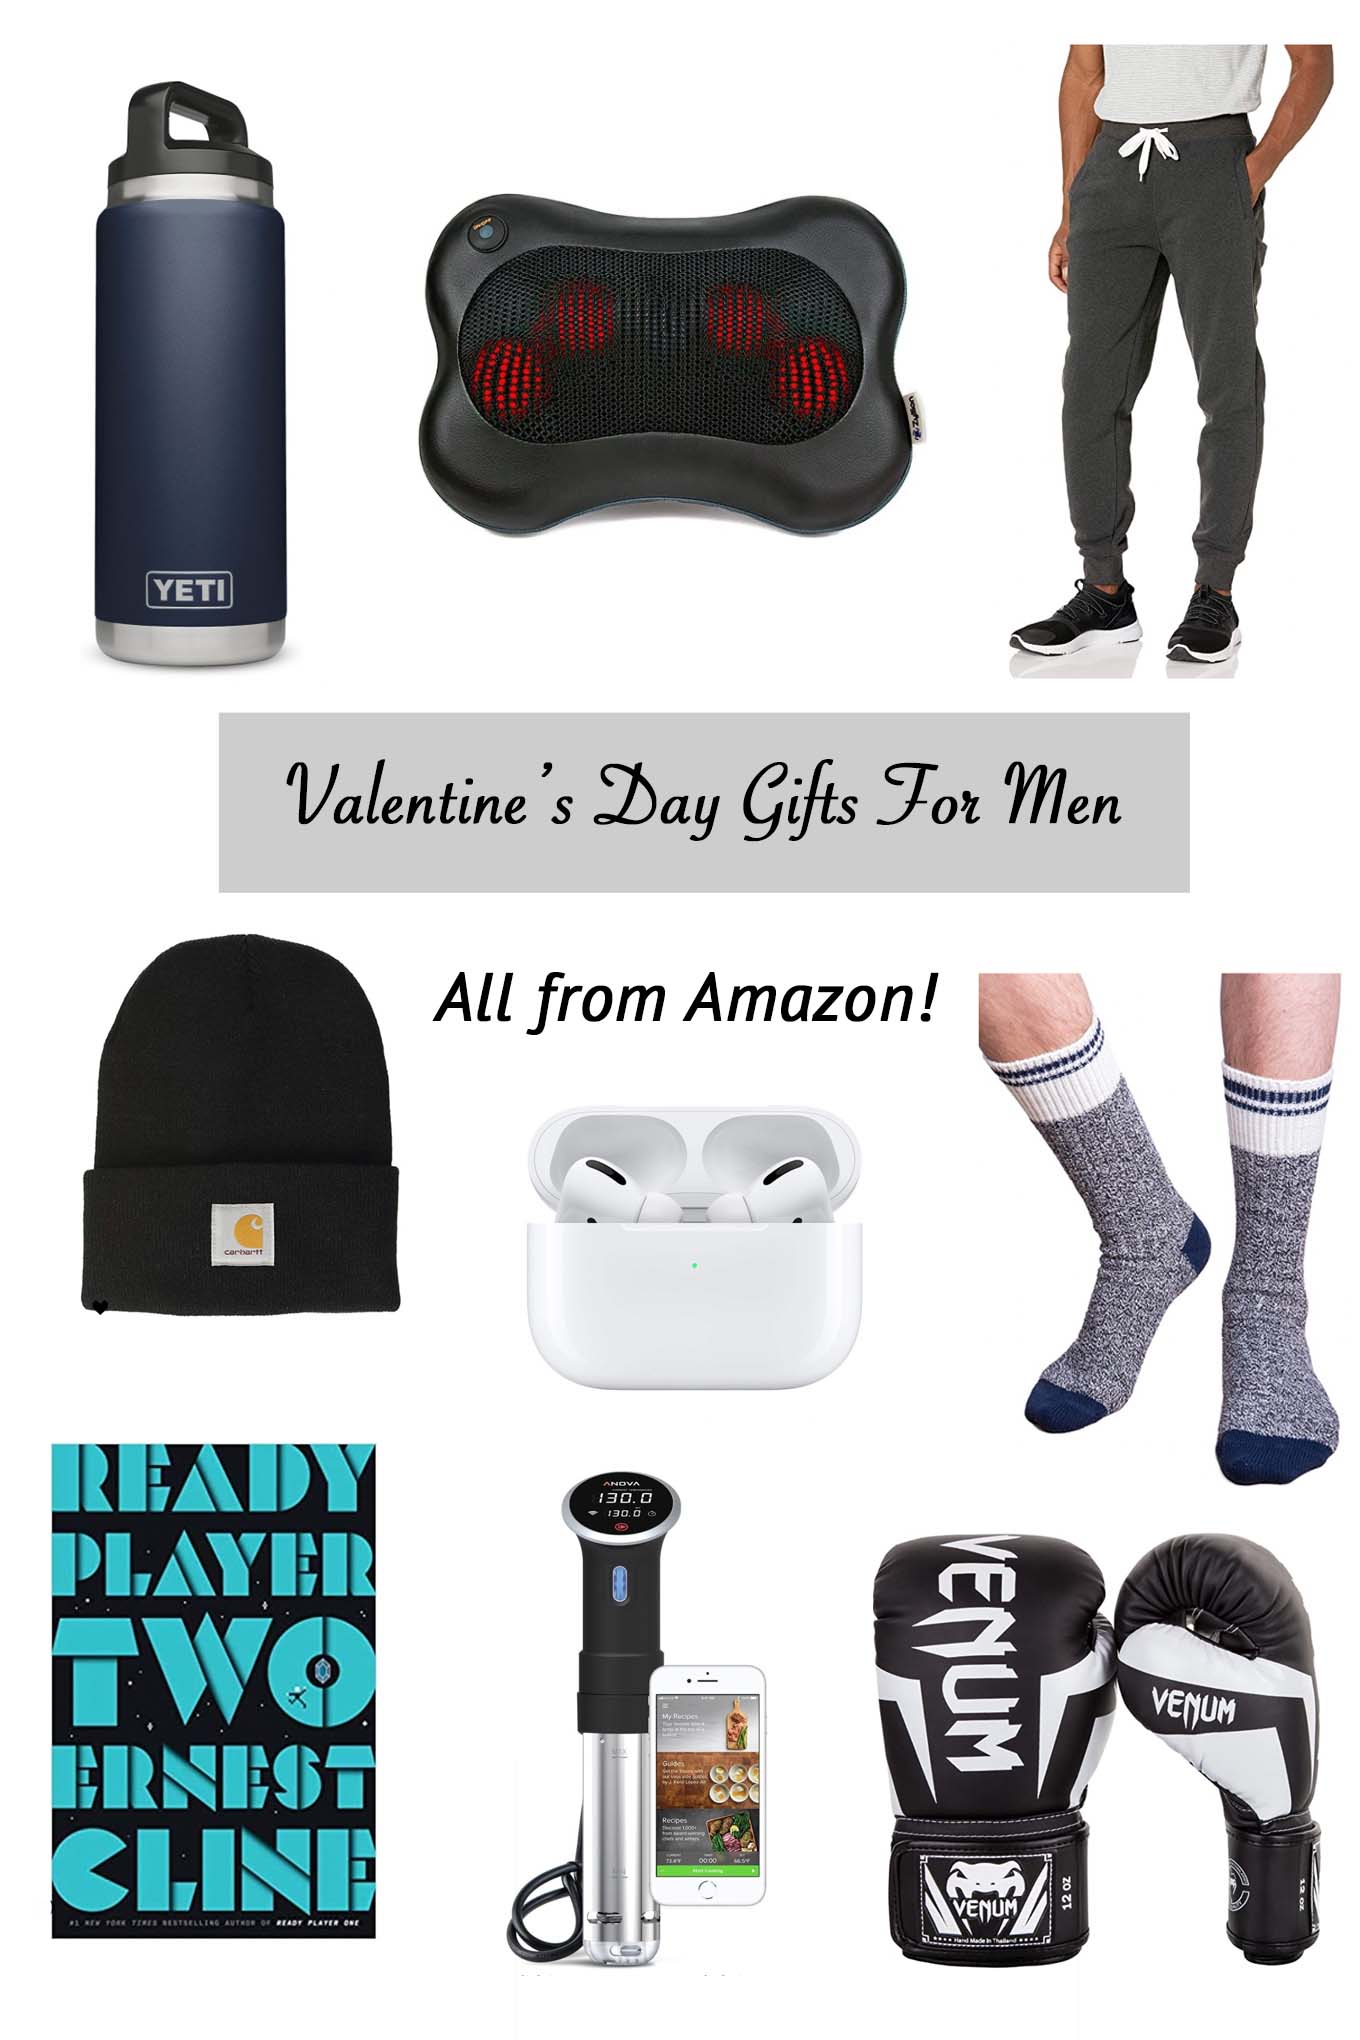 Valentine's Day Gifts for Him by popular Chicago life and style blog, Glass of Glam: collage image of a Yeti tumbler, grey jogger pants, black Carhart beanie, Air pods, wool socks, Ready Player Two, boxing gloves, back massager, Anova Sous Vide. 